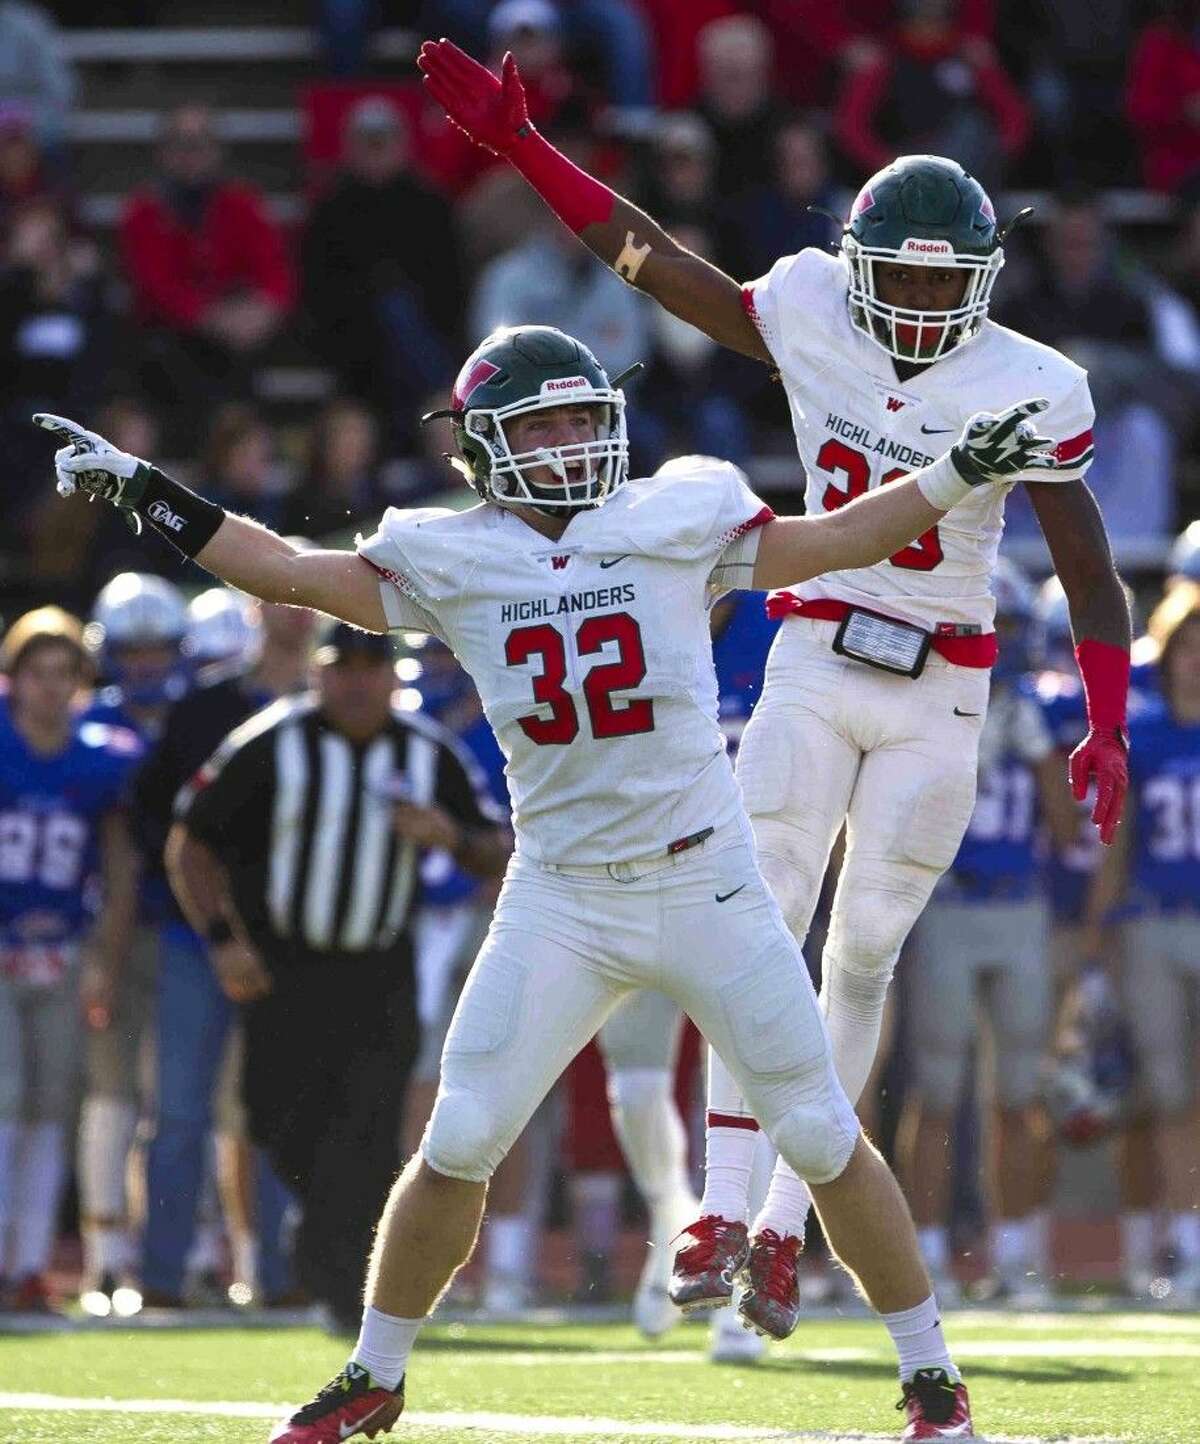 The Woodlands linebacker Matt Mahoney and defensive back Talon Baskin signal for possession after the Highlanders recoverd a Westlake fumble during the first quarter of a Region II-6A Division II area playoff football game Saturday in Bryan.